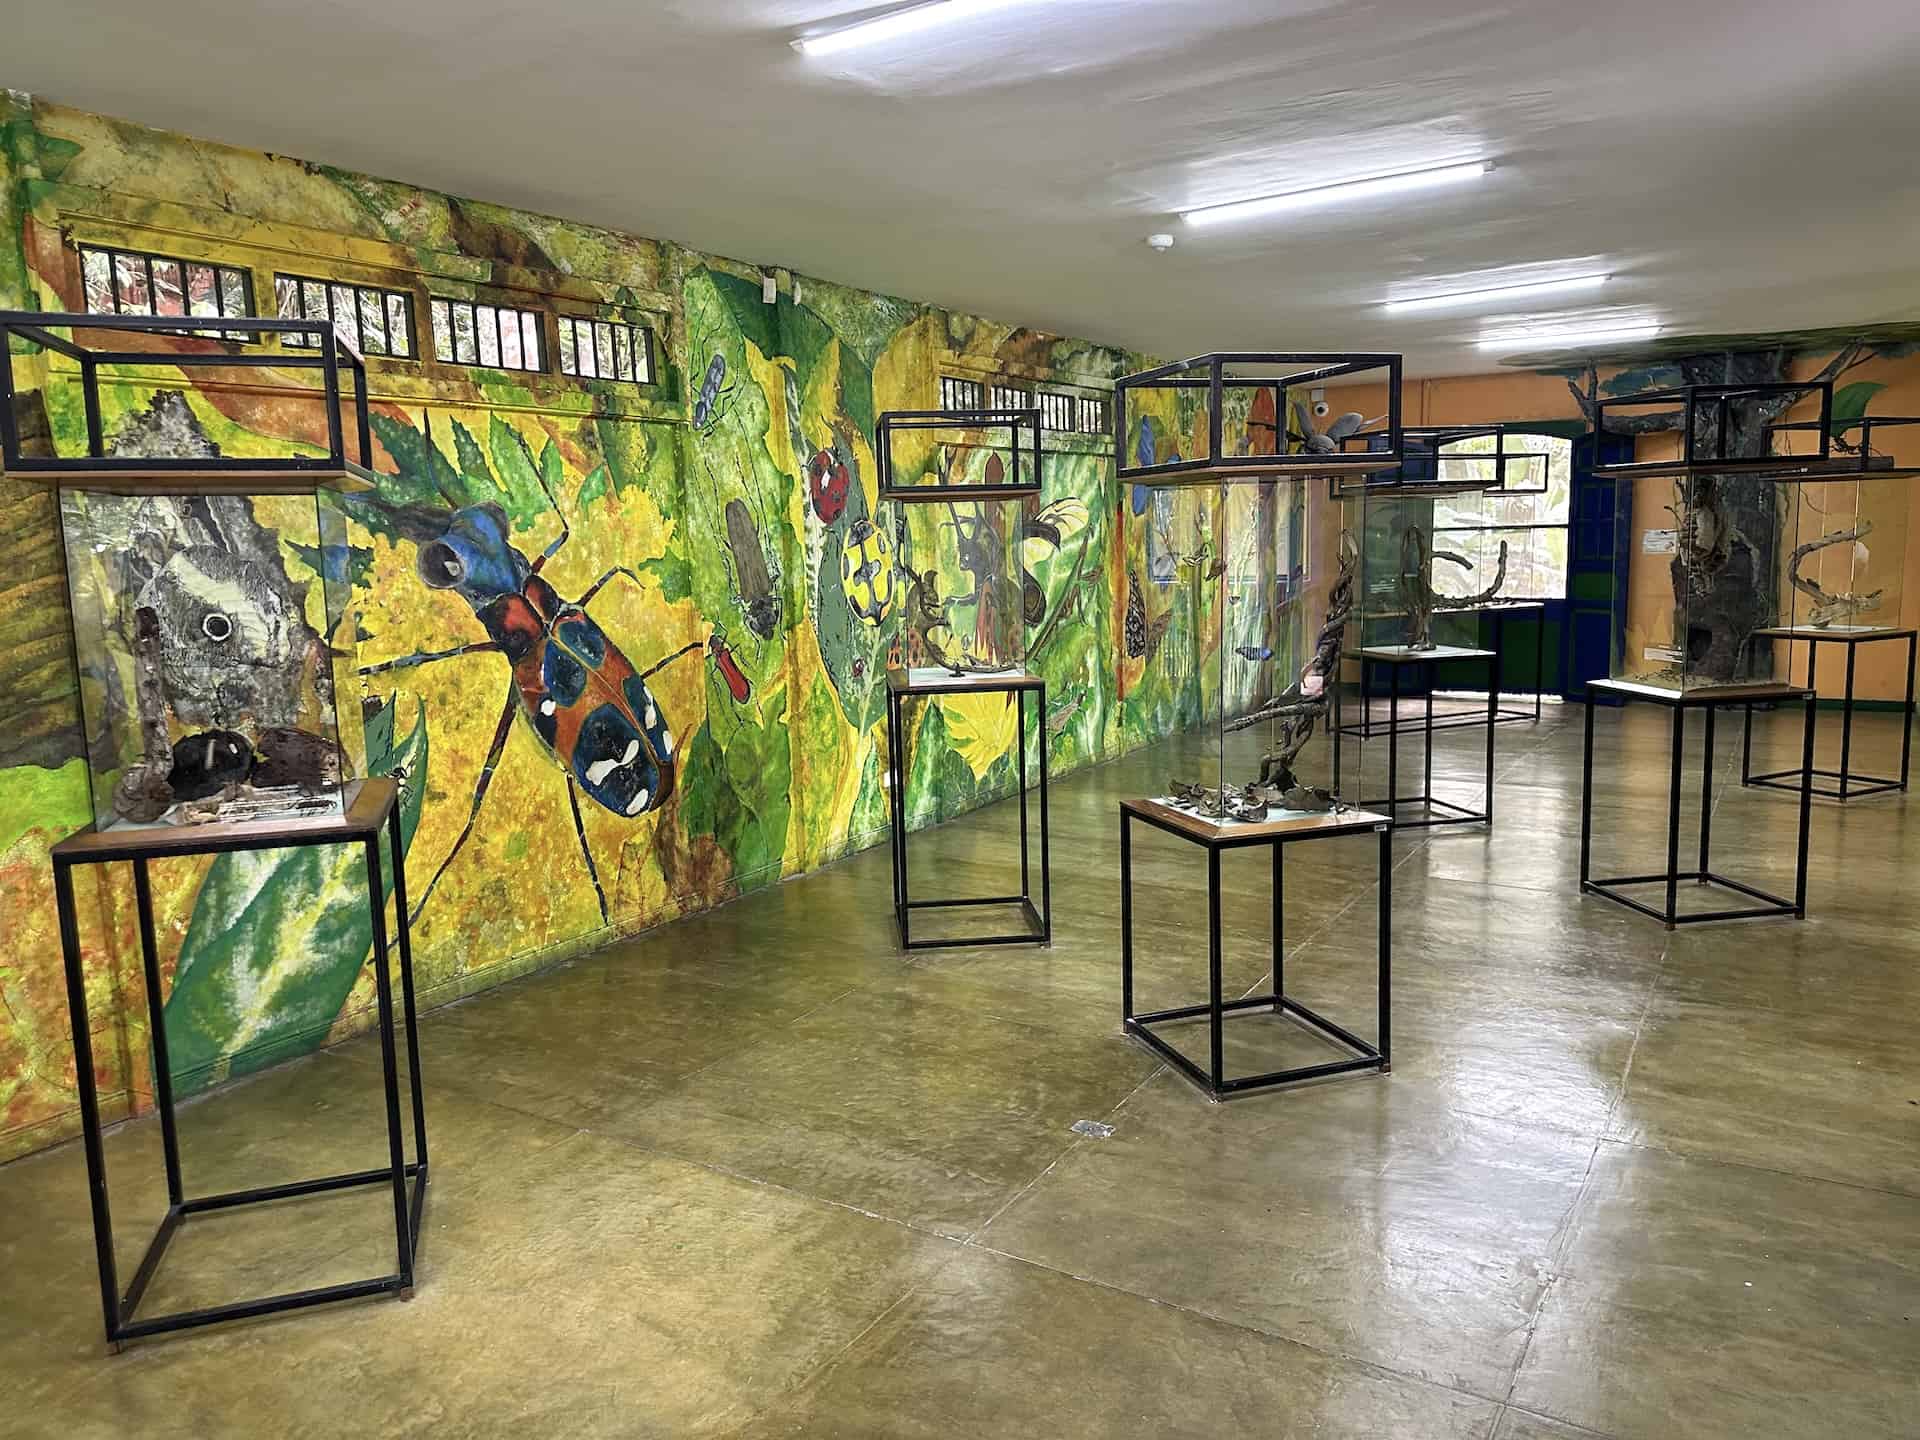 Insectarium at the Quindío Botanical Garden in Calarcá, Colombia